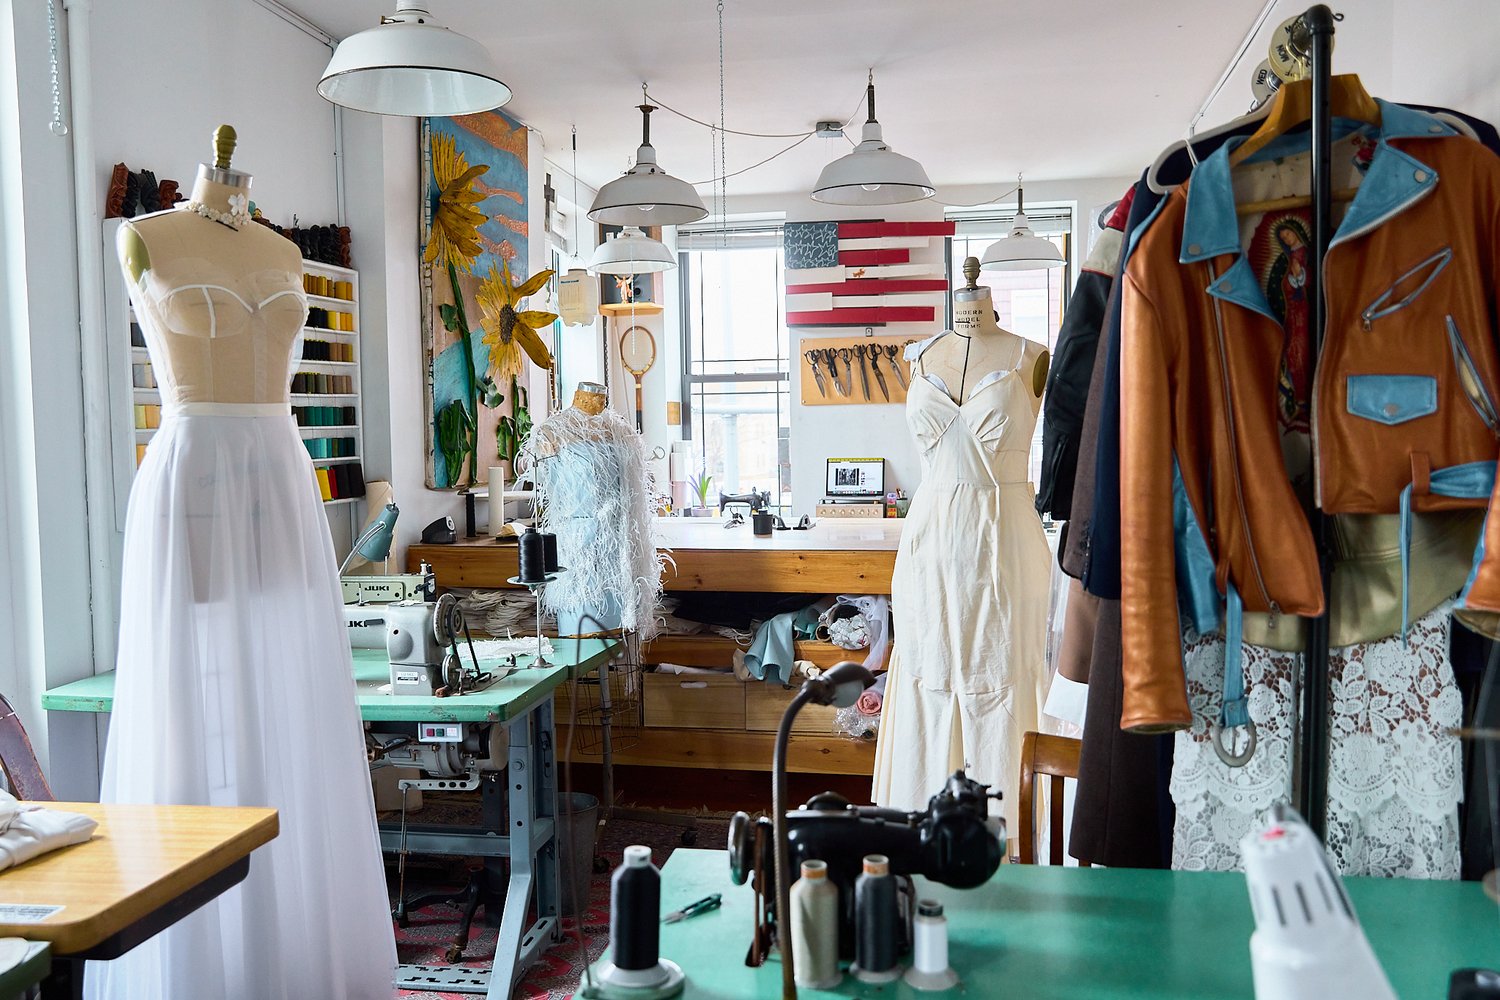 The 10 Best Tailors in NYC